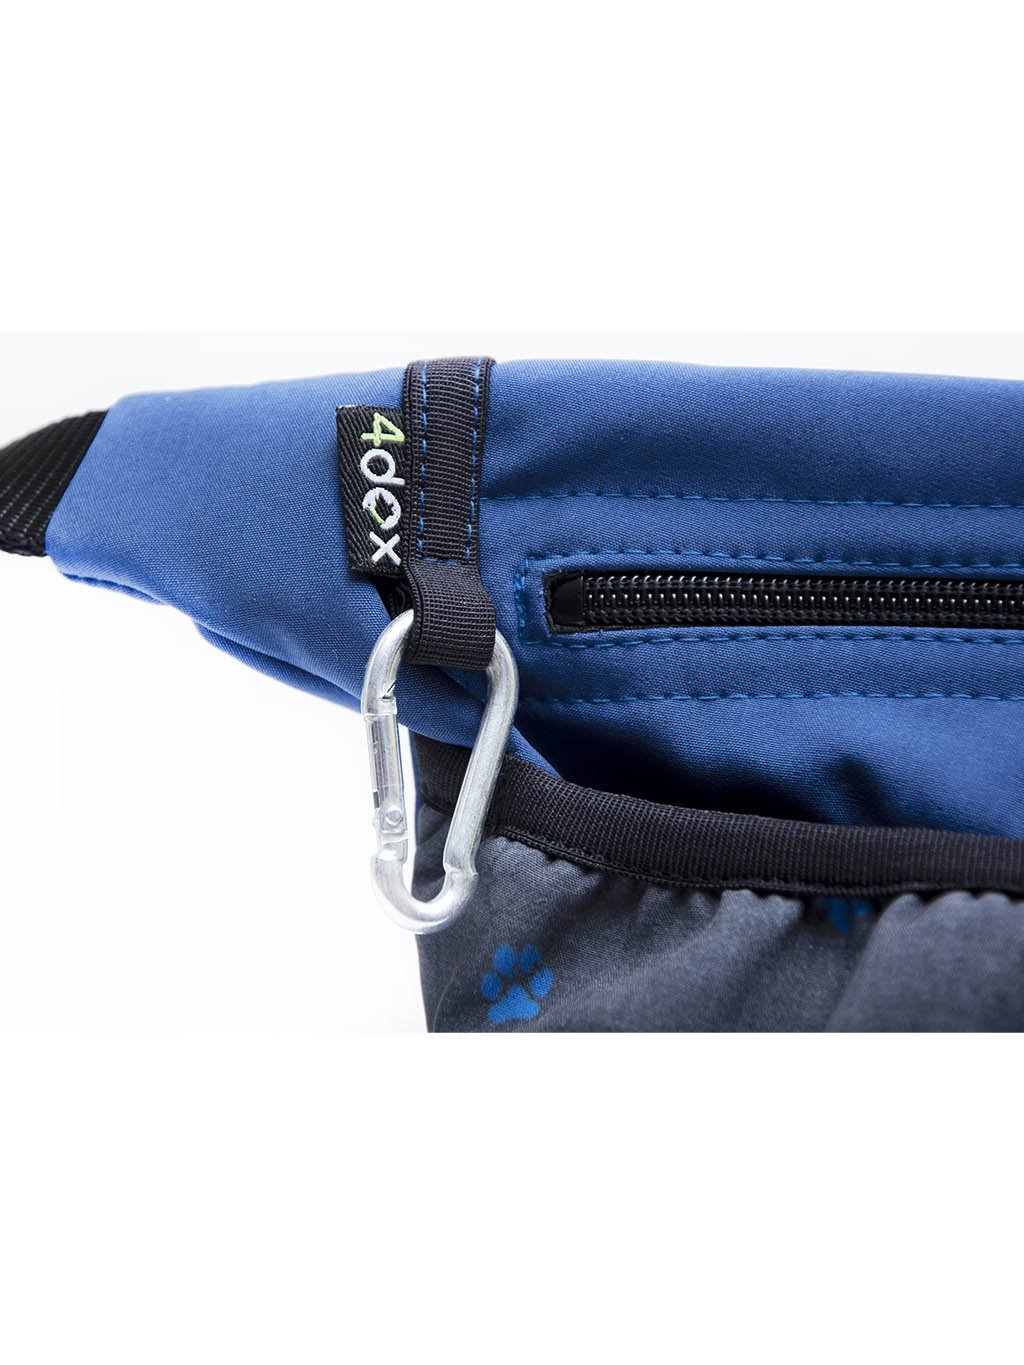 Dog training treat pouch with a magnetic fastening, blue No. 4